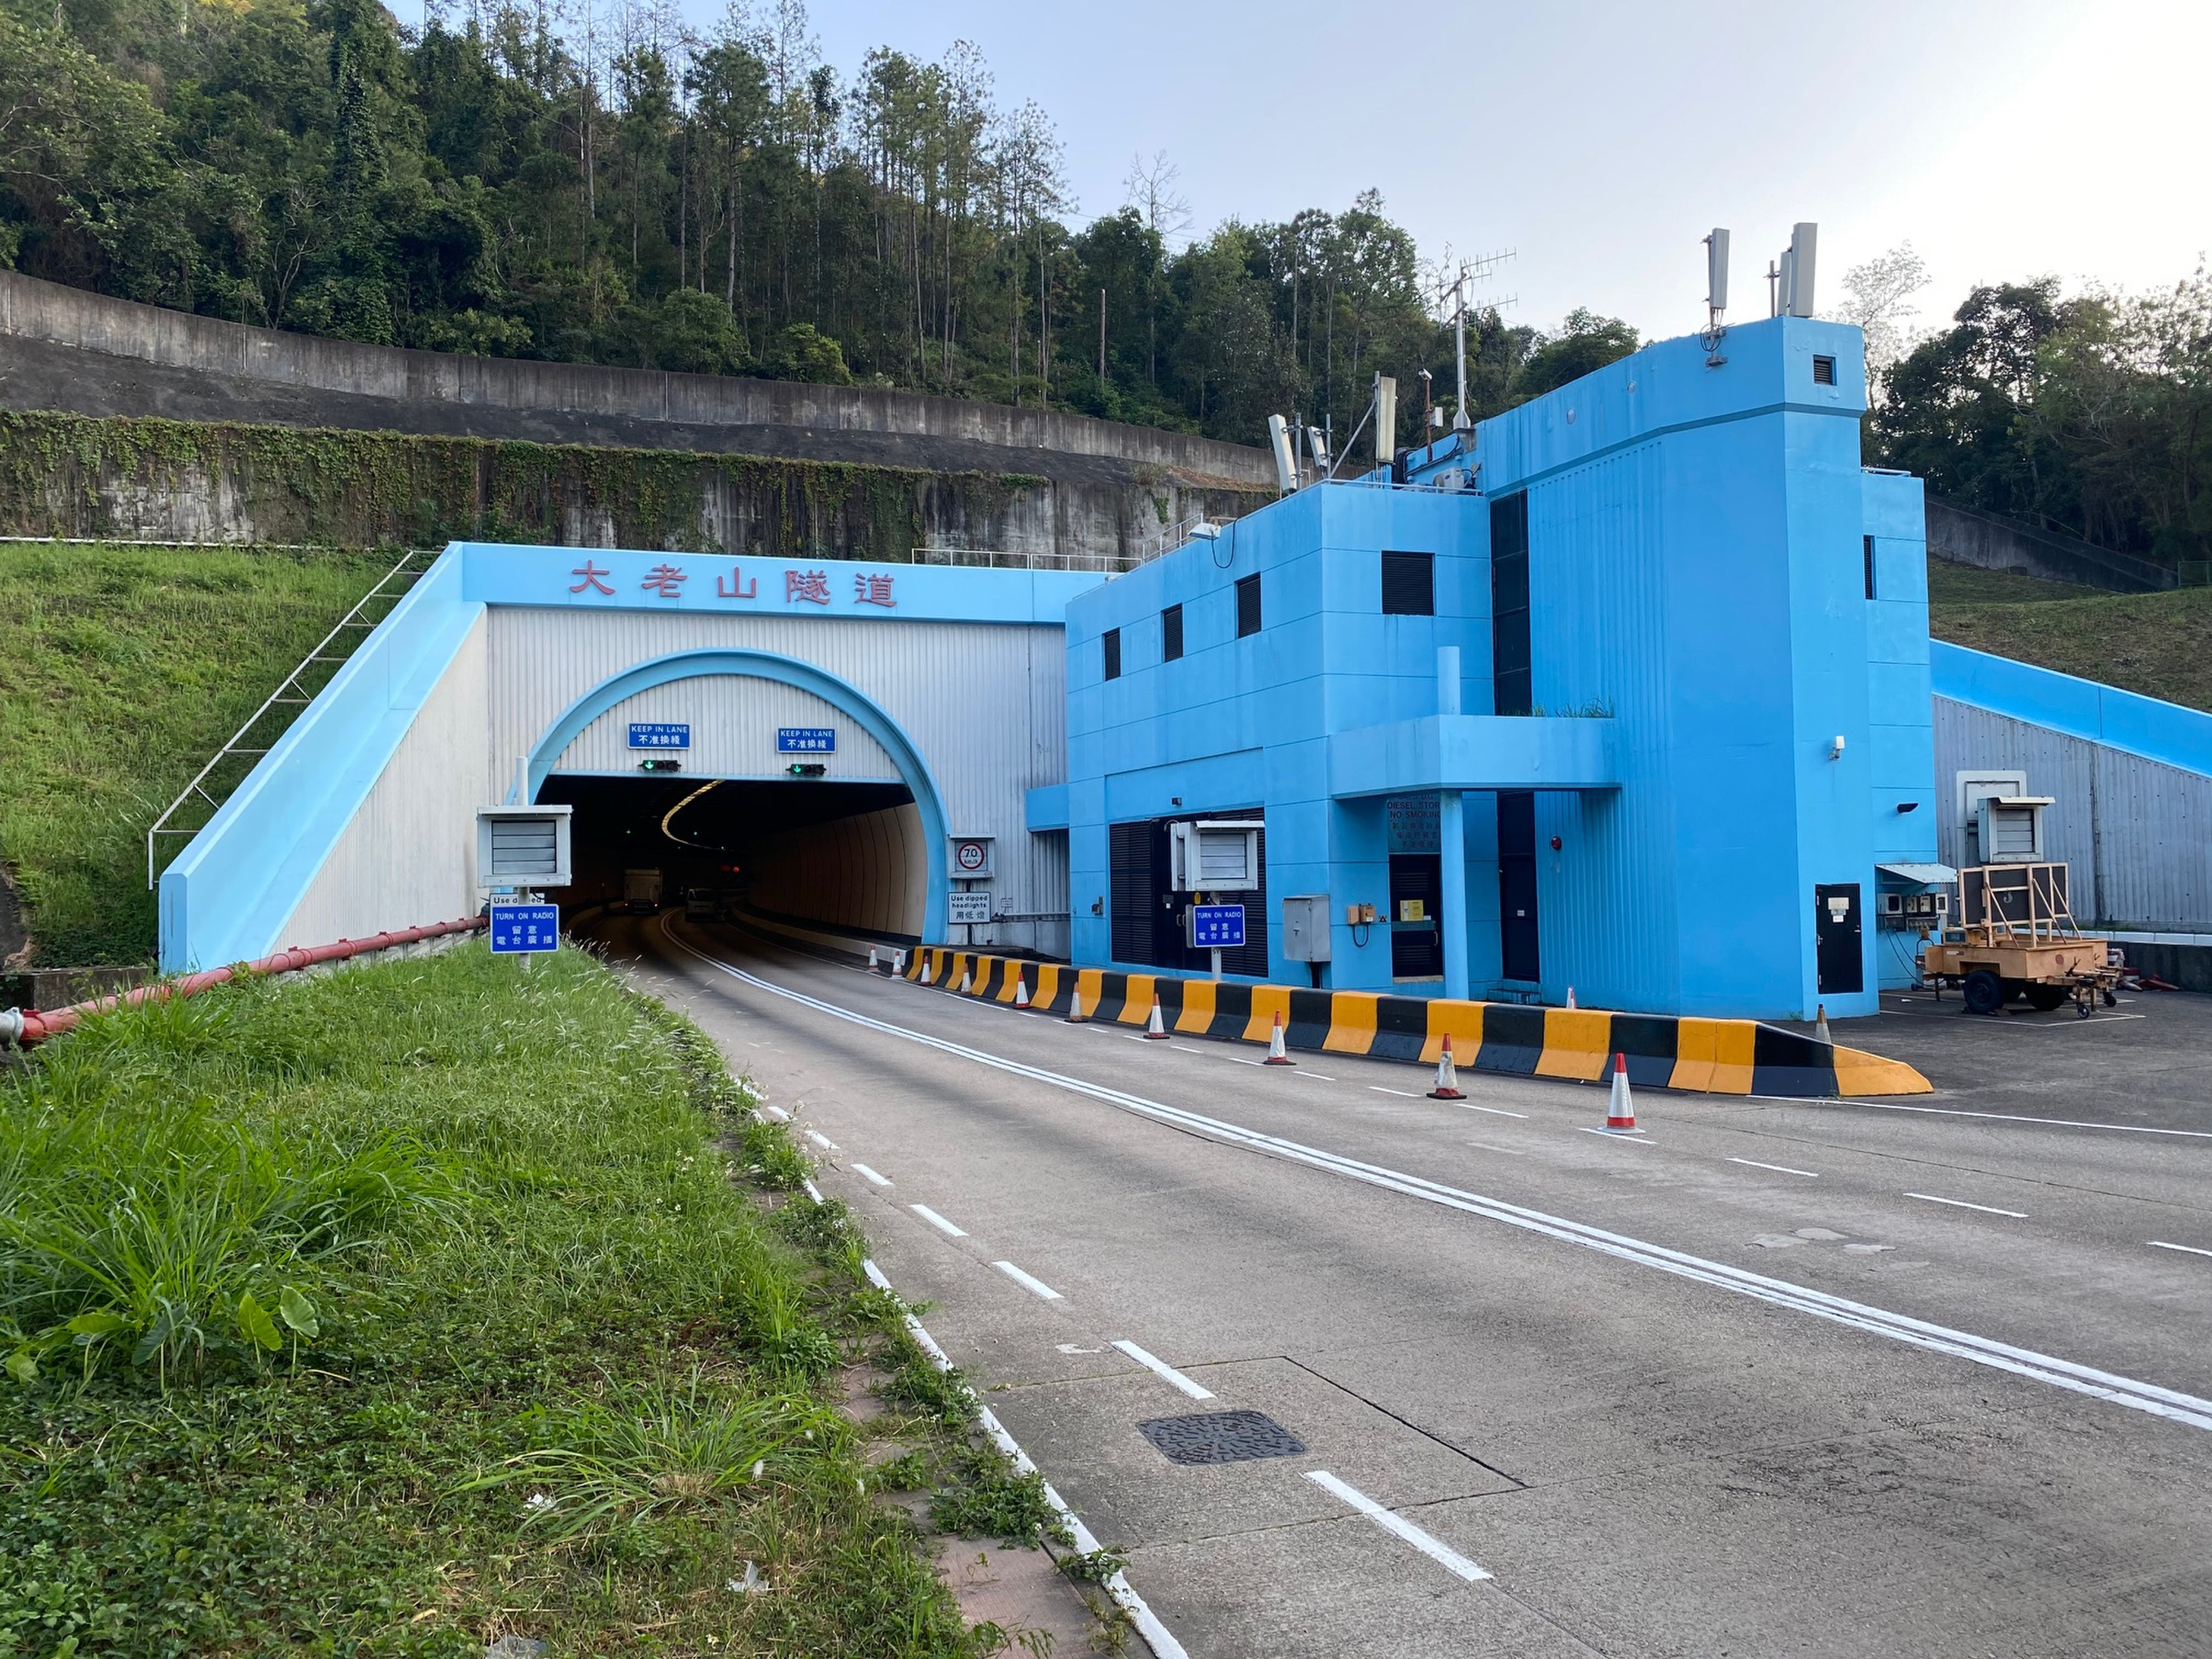 One of the entrances to Tate’s Cairn Tunnel. More than 810,000 vehicle tags have been issued for using the HKeToll system. Photo: Transport Department